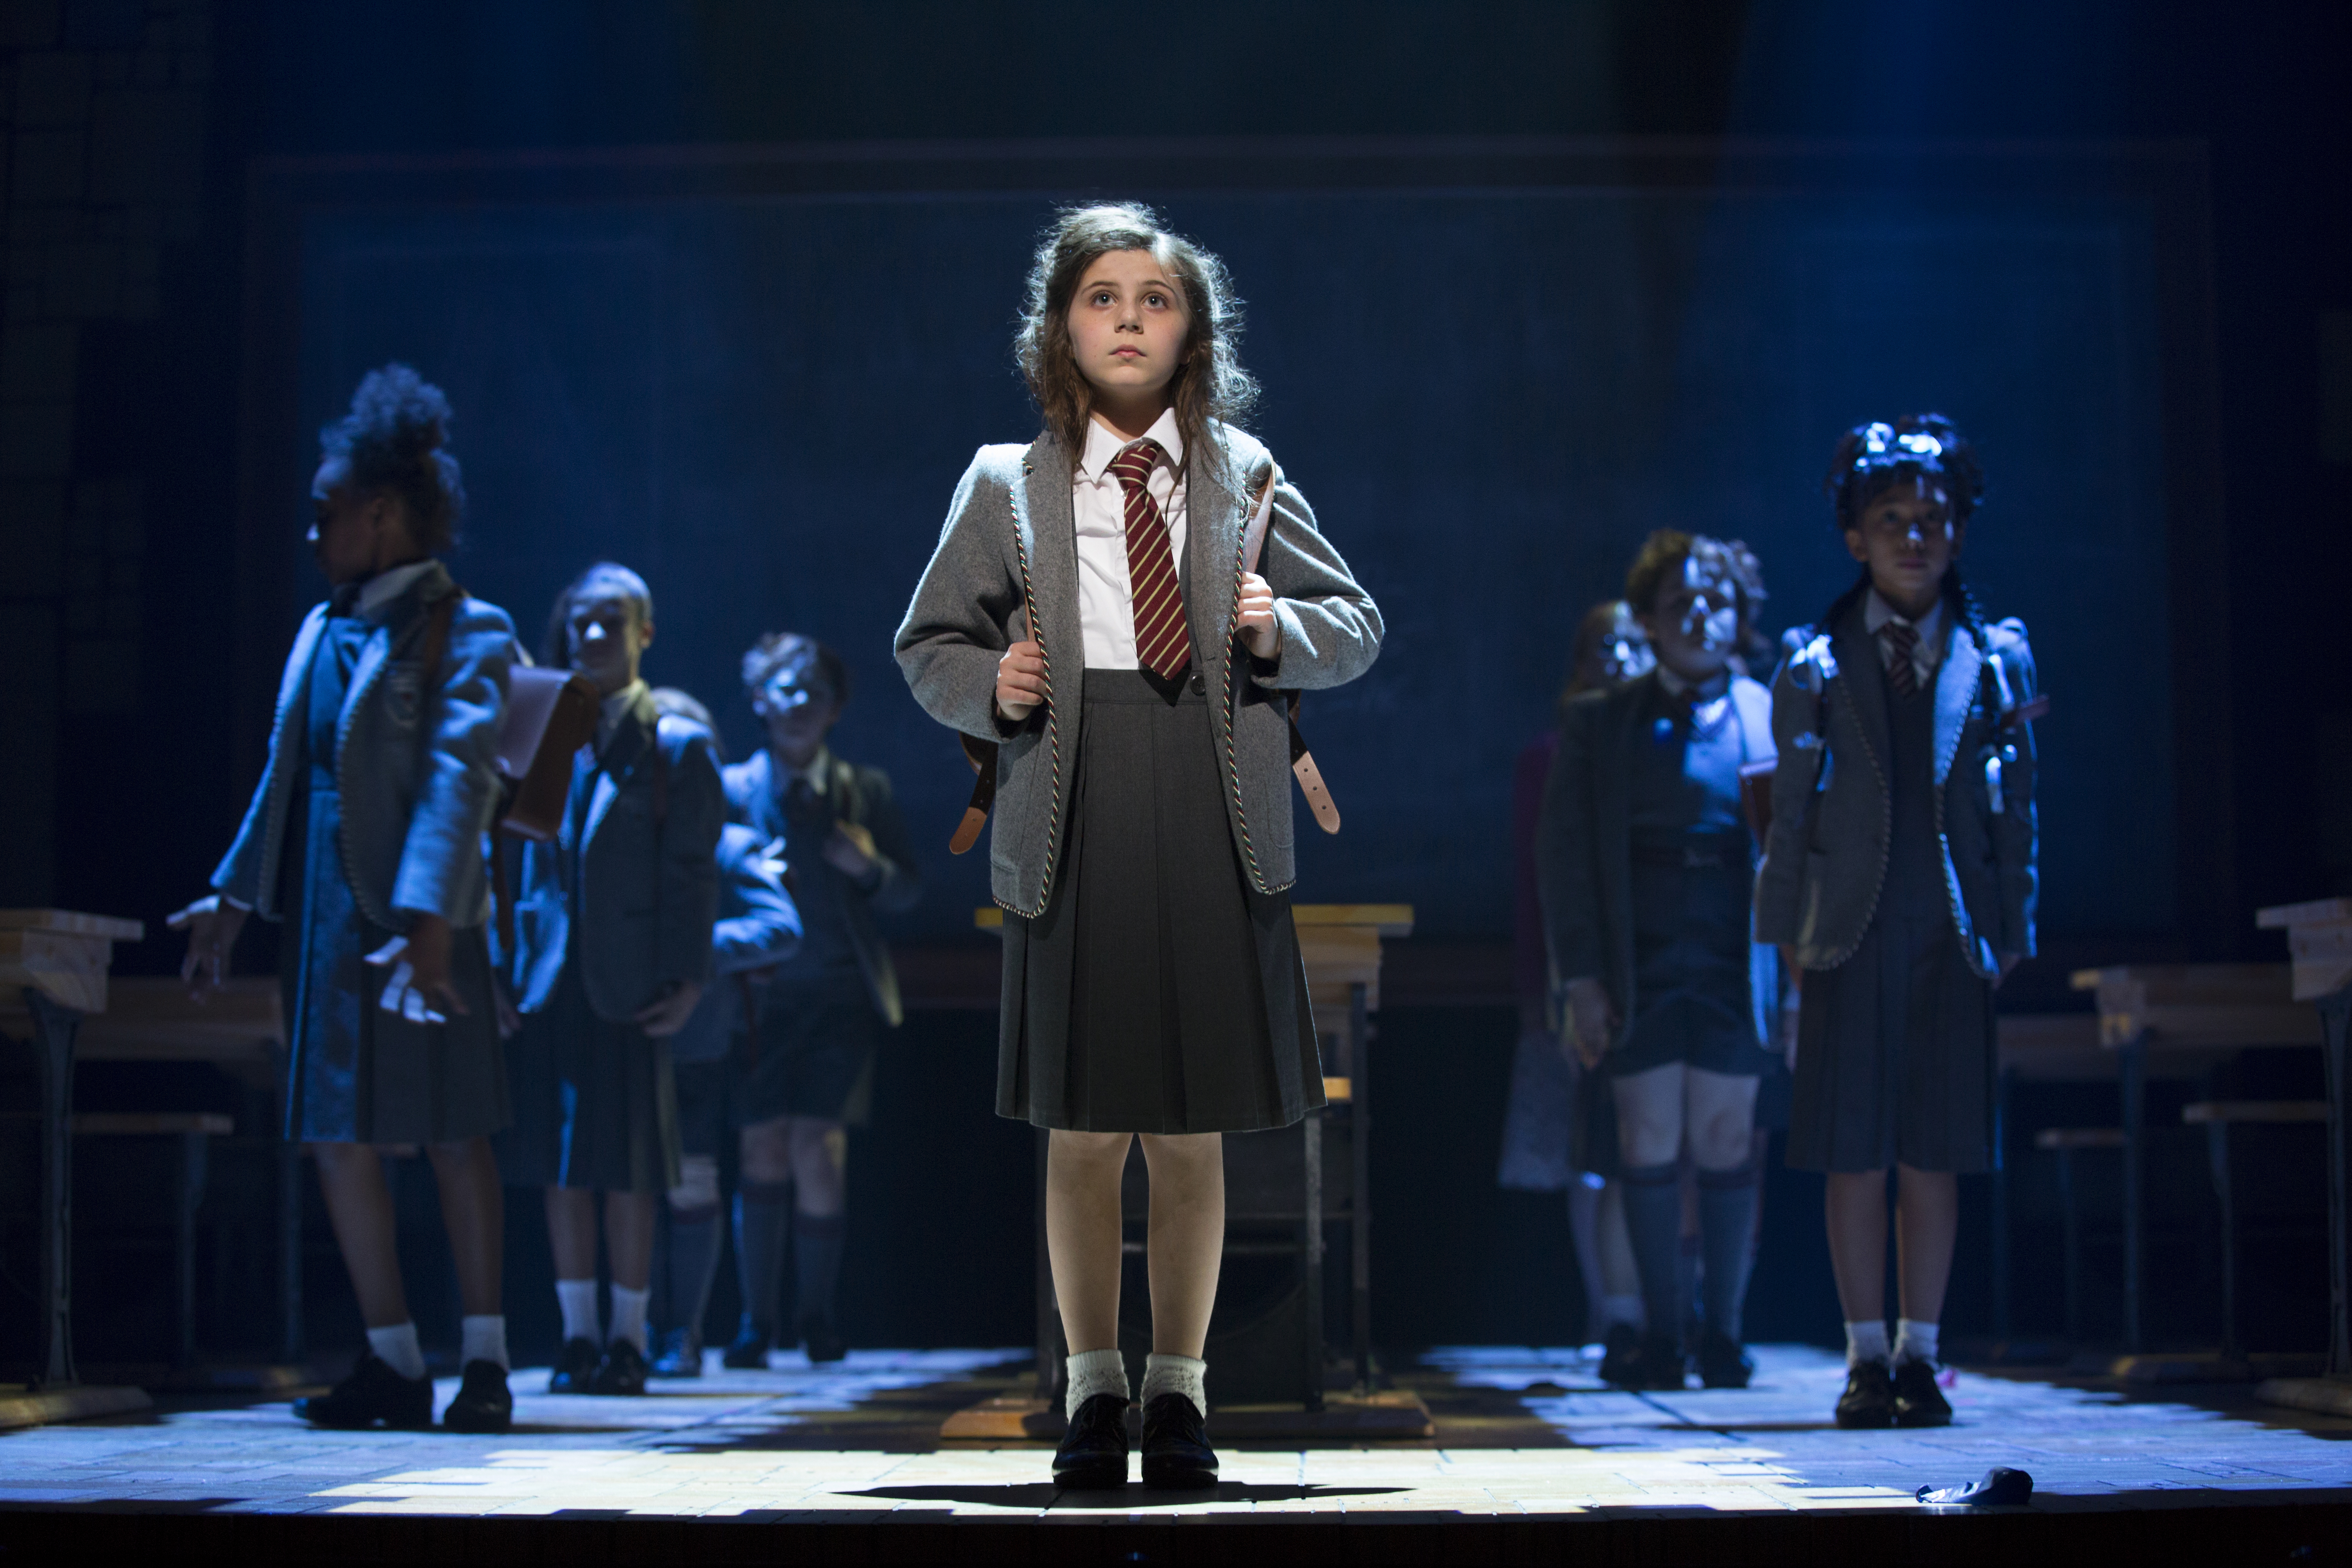 MATILDA THE MUSICAL Runs March 22-April 10 at The Oriental Theatre 1 Broadway In Chicago is thrilled to announce that MATILDA THE MUSICAL, produced by the Royal Shakespeare Company and The Dodgers will play Chicago’s Oriental Theatre (24 W Randolph) March 22 through April 10, 2016.